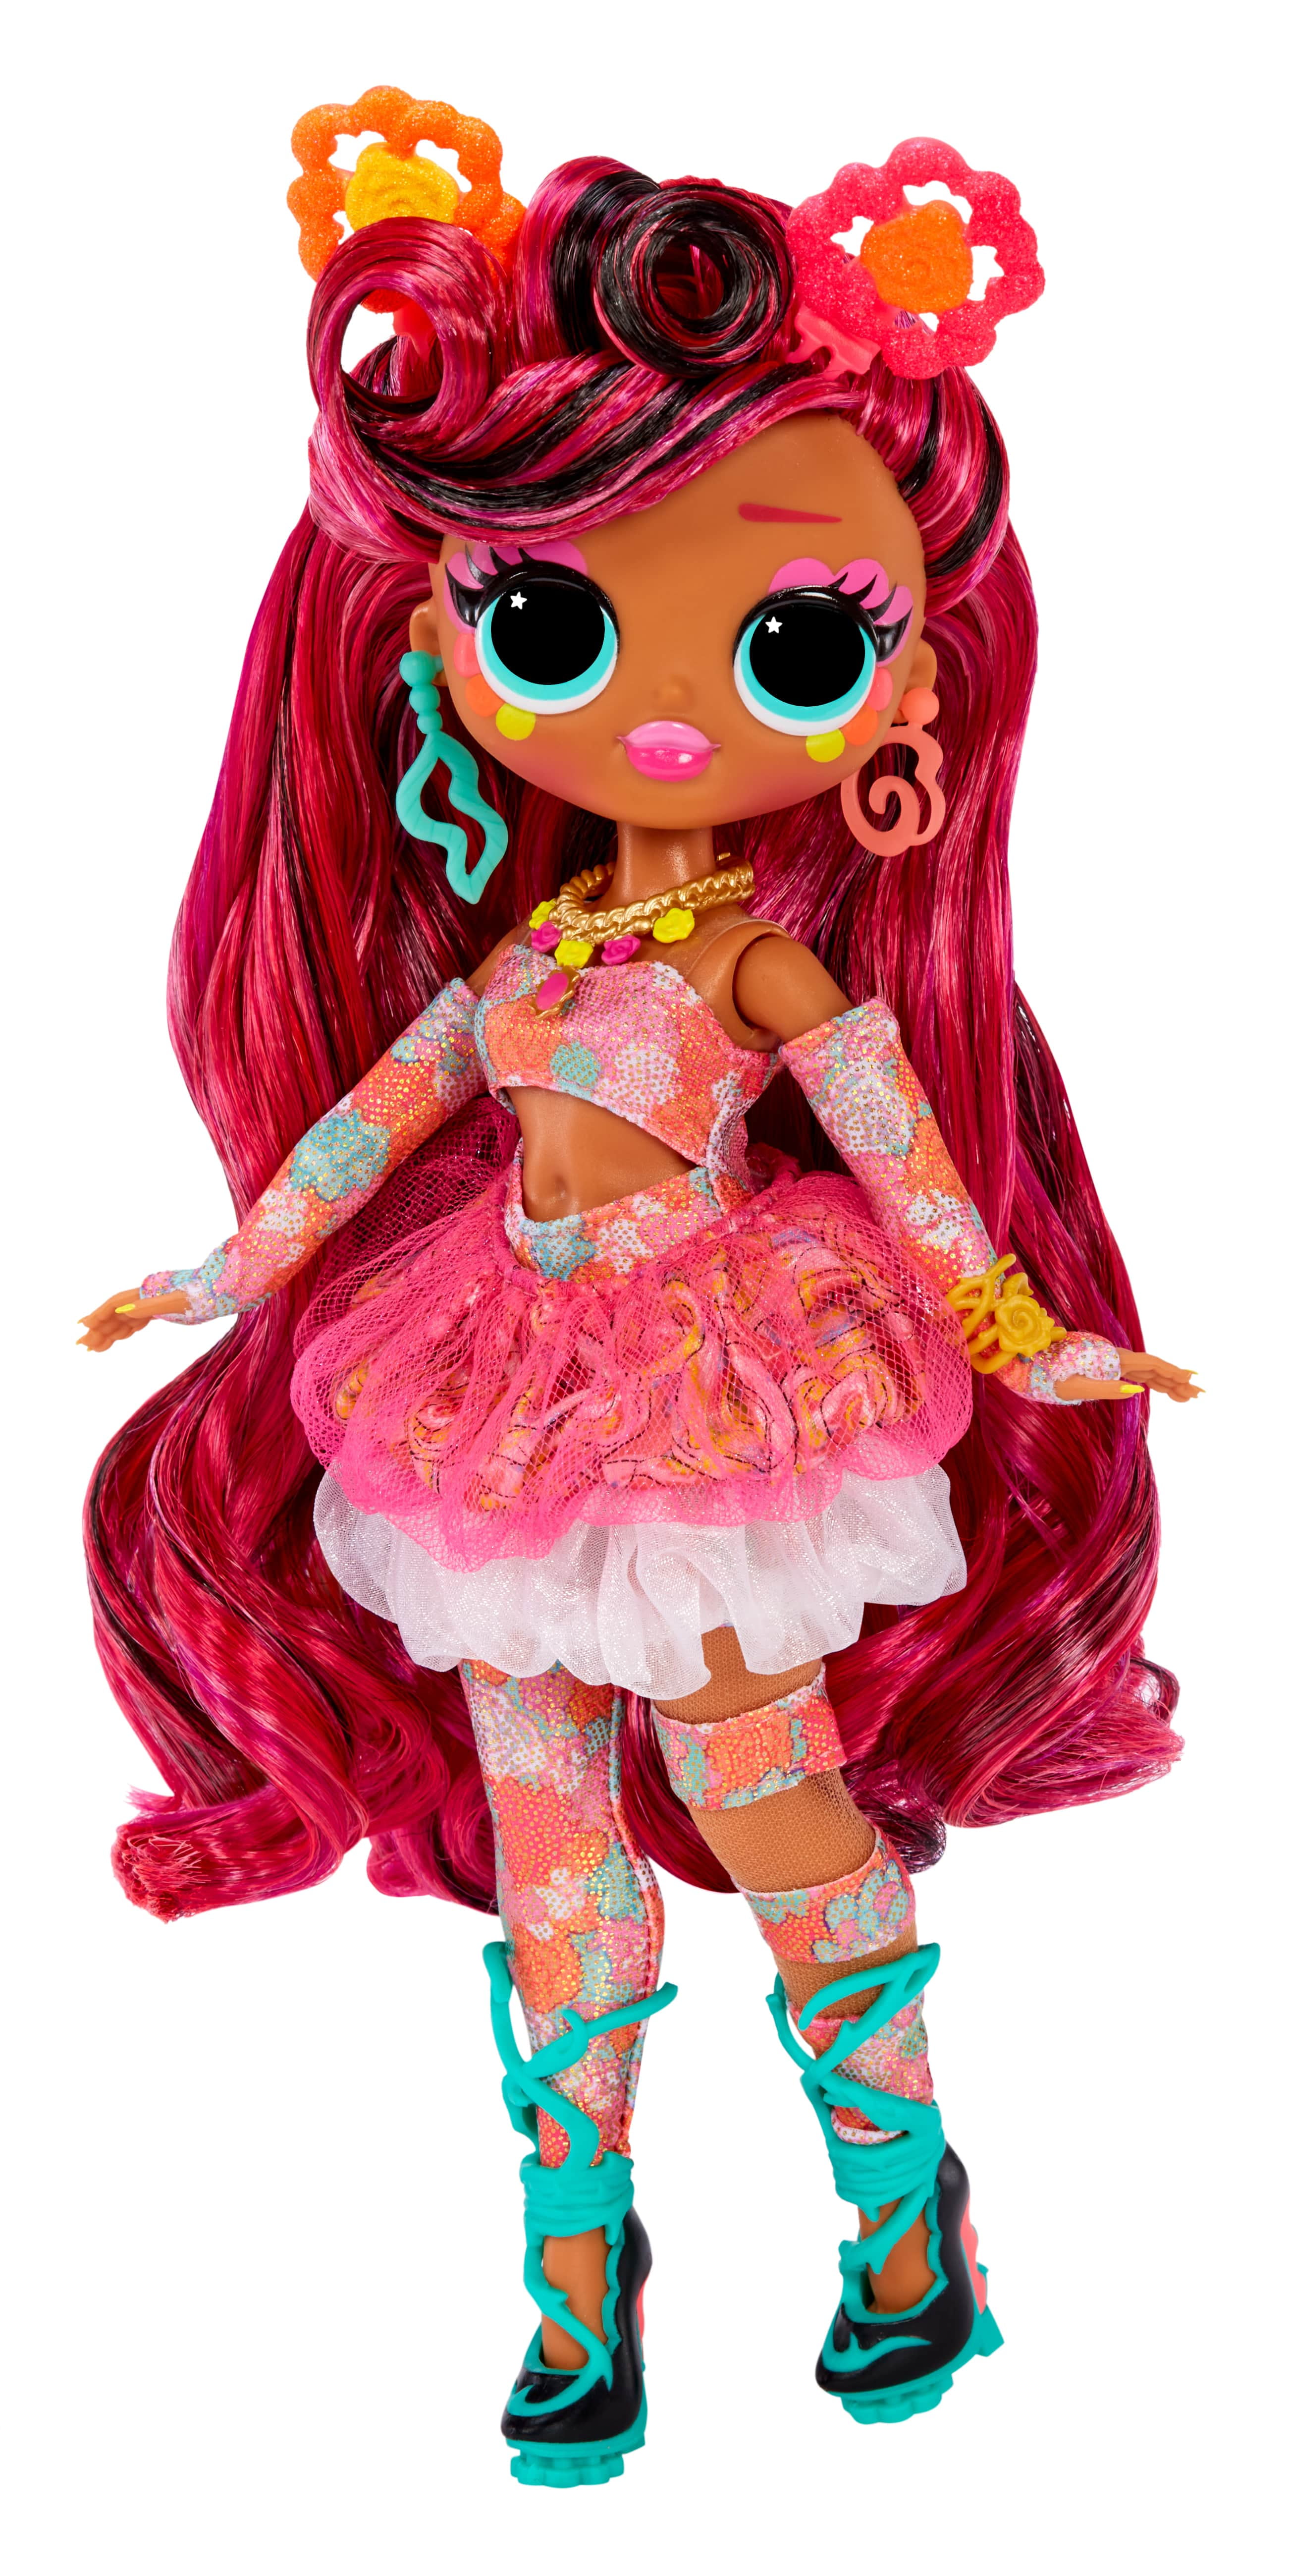 L.O.L Surprise! LOL Surprise OMG Queens Miss Divine fashion doll with 20 Surprises Including Outfit and Accessories for Fashion Toy, Girls Ages 3 and up, 10-inch doll